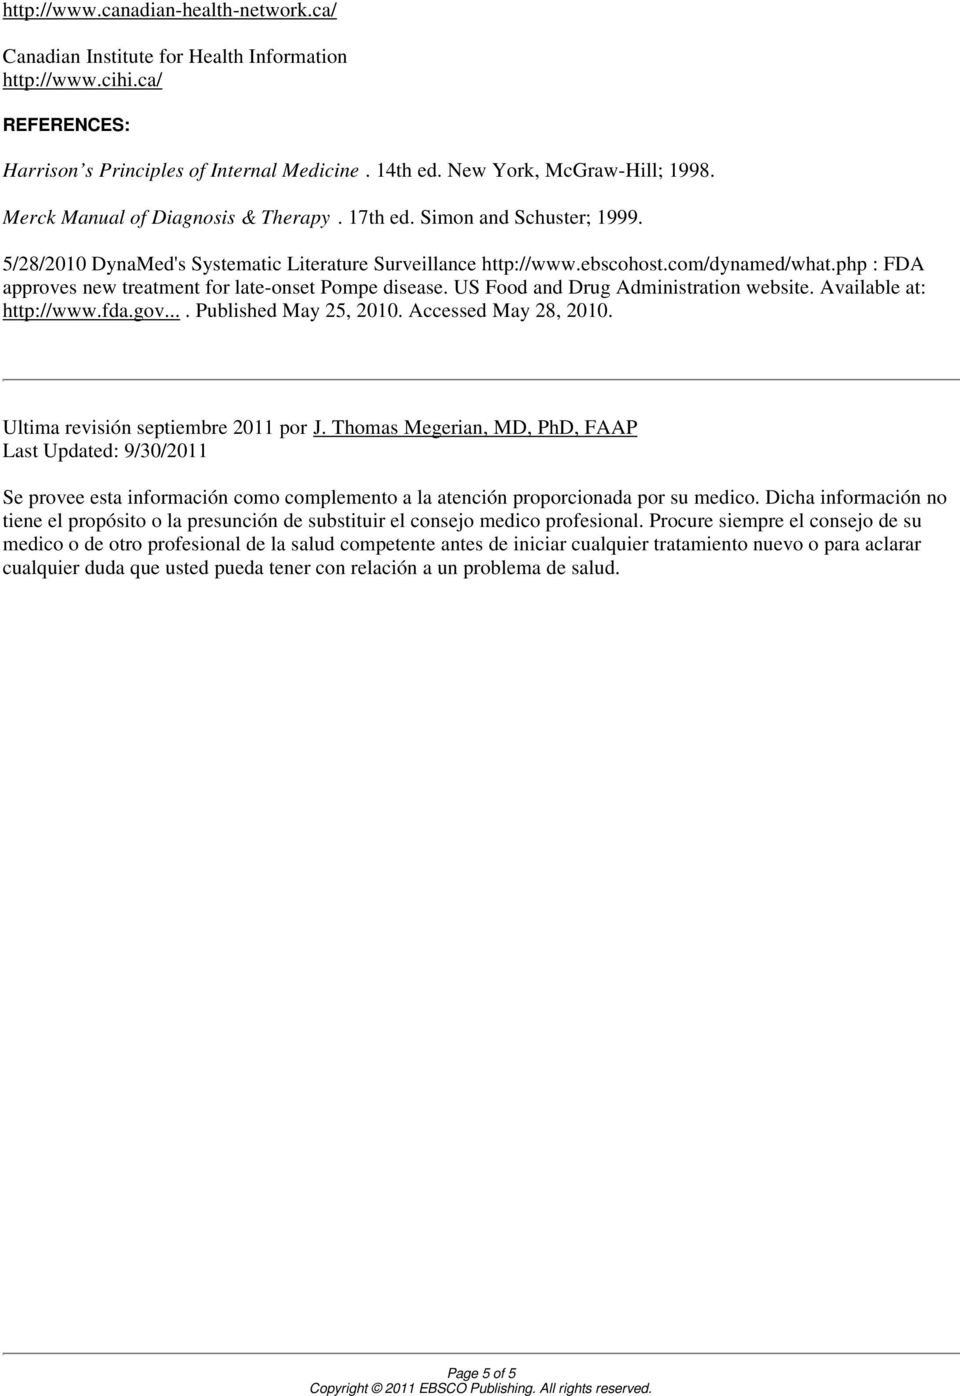 php : FDA approves new treatment for late-onset Pompe disease. US Food and Drug Administration website. Available at: http://www.fda.gov.... Published May 25, 2010. Accessed May 28, 2010.